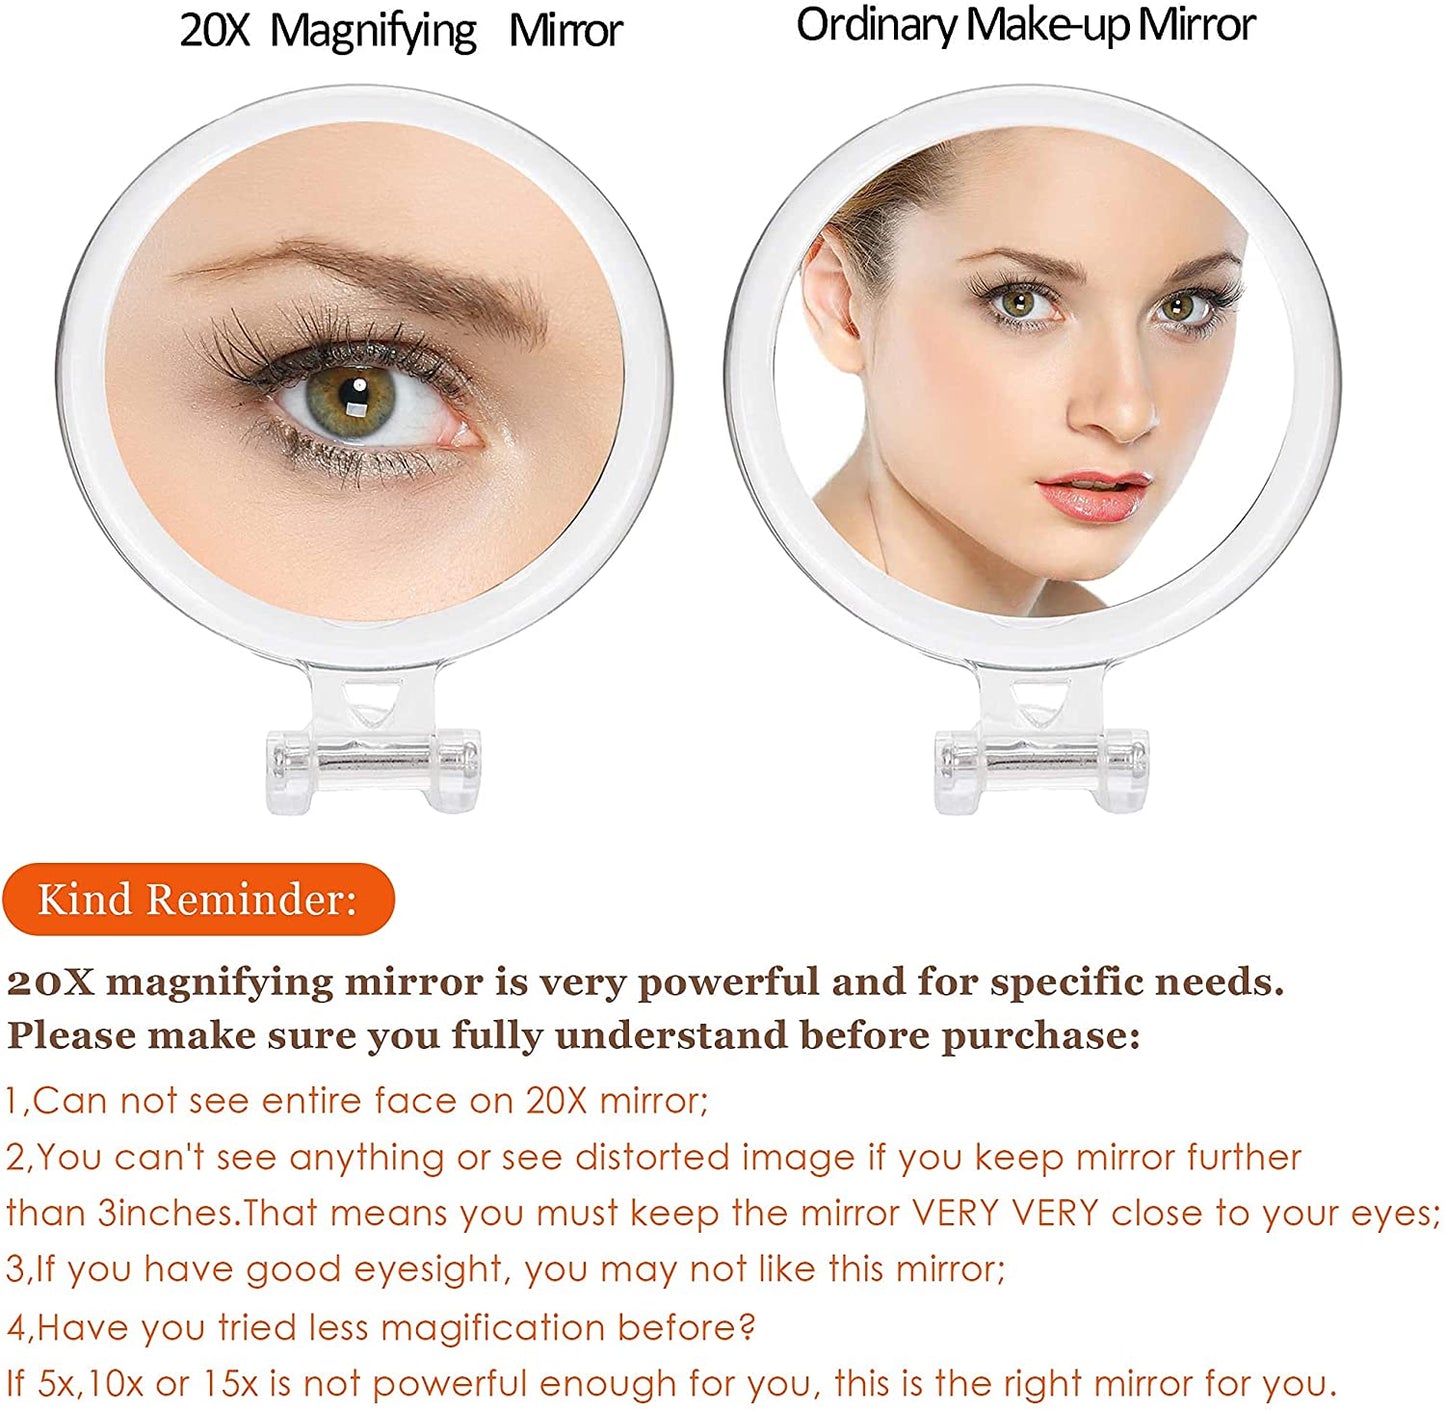 20X Magnifying Hand Mirror Two Sided Use for Makeup Application, Tweezing, and Blackhead/Blemish Removal (15 cm) - image7